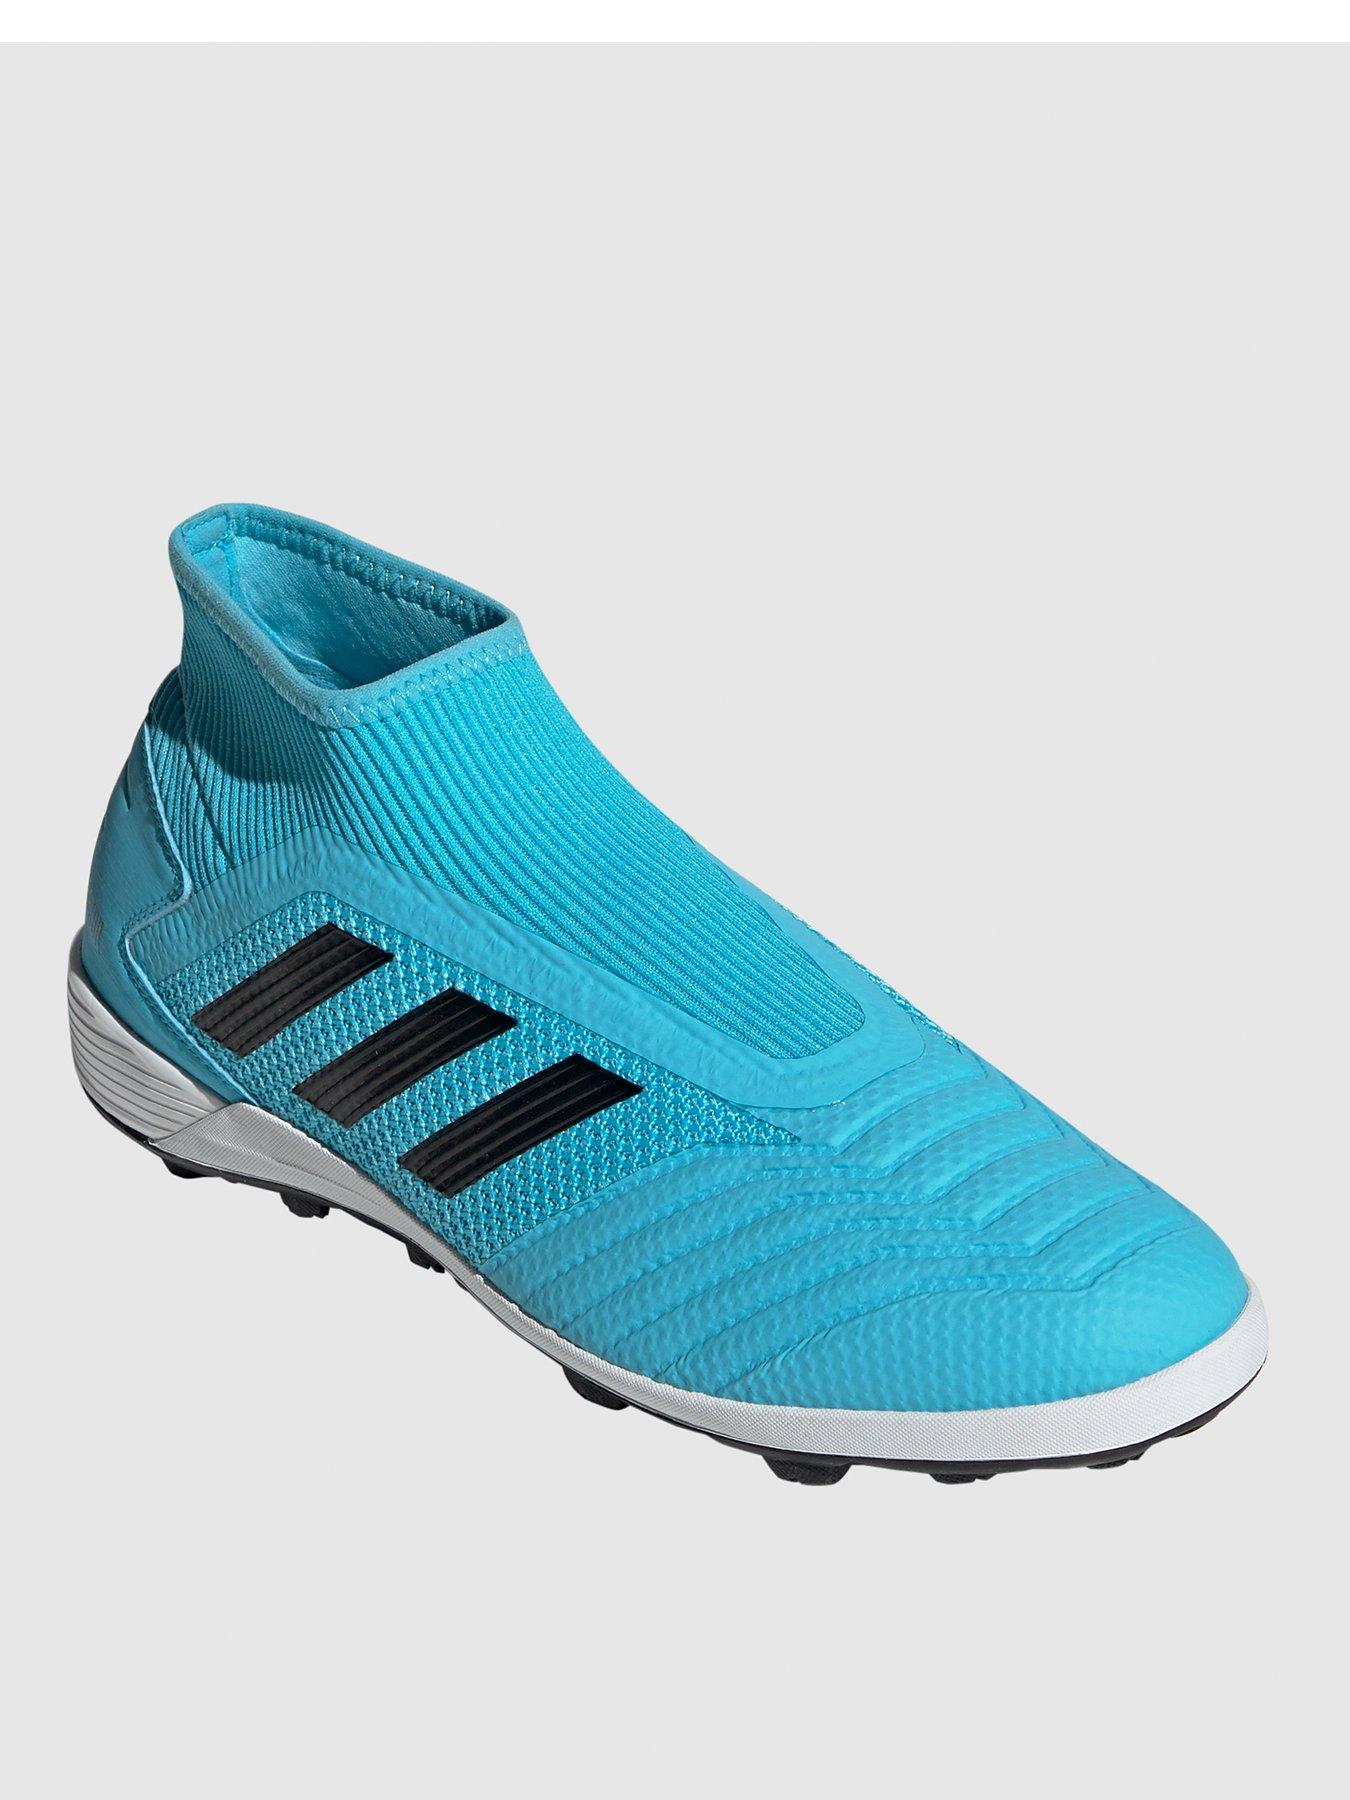 adidas laceless astro turf boots